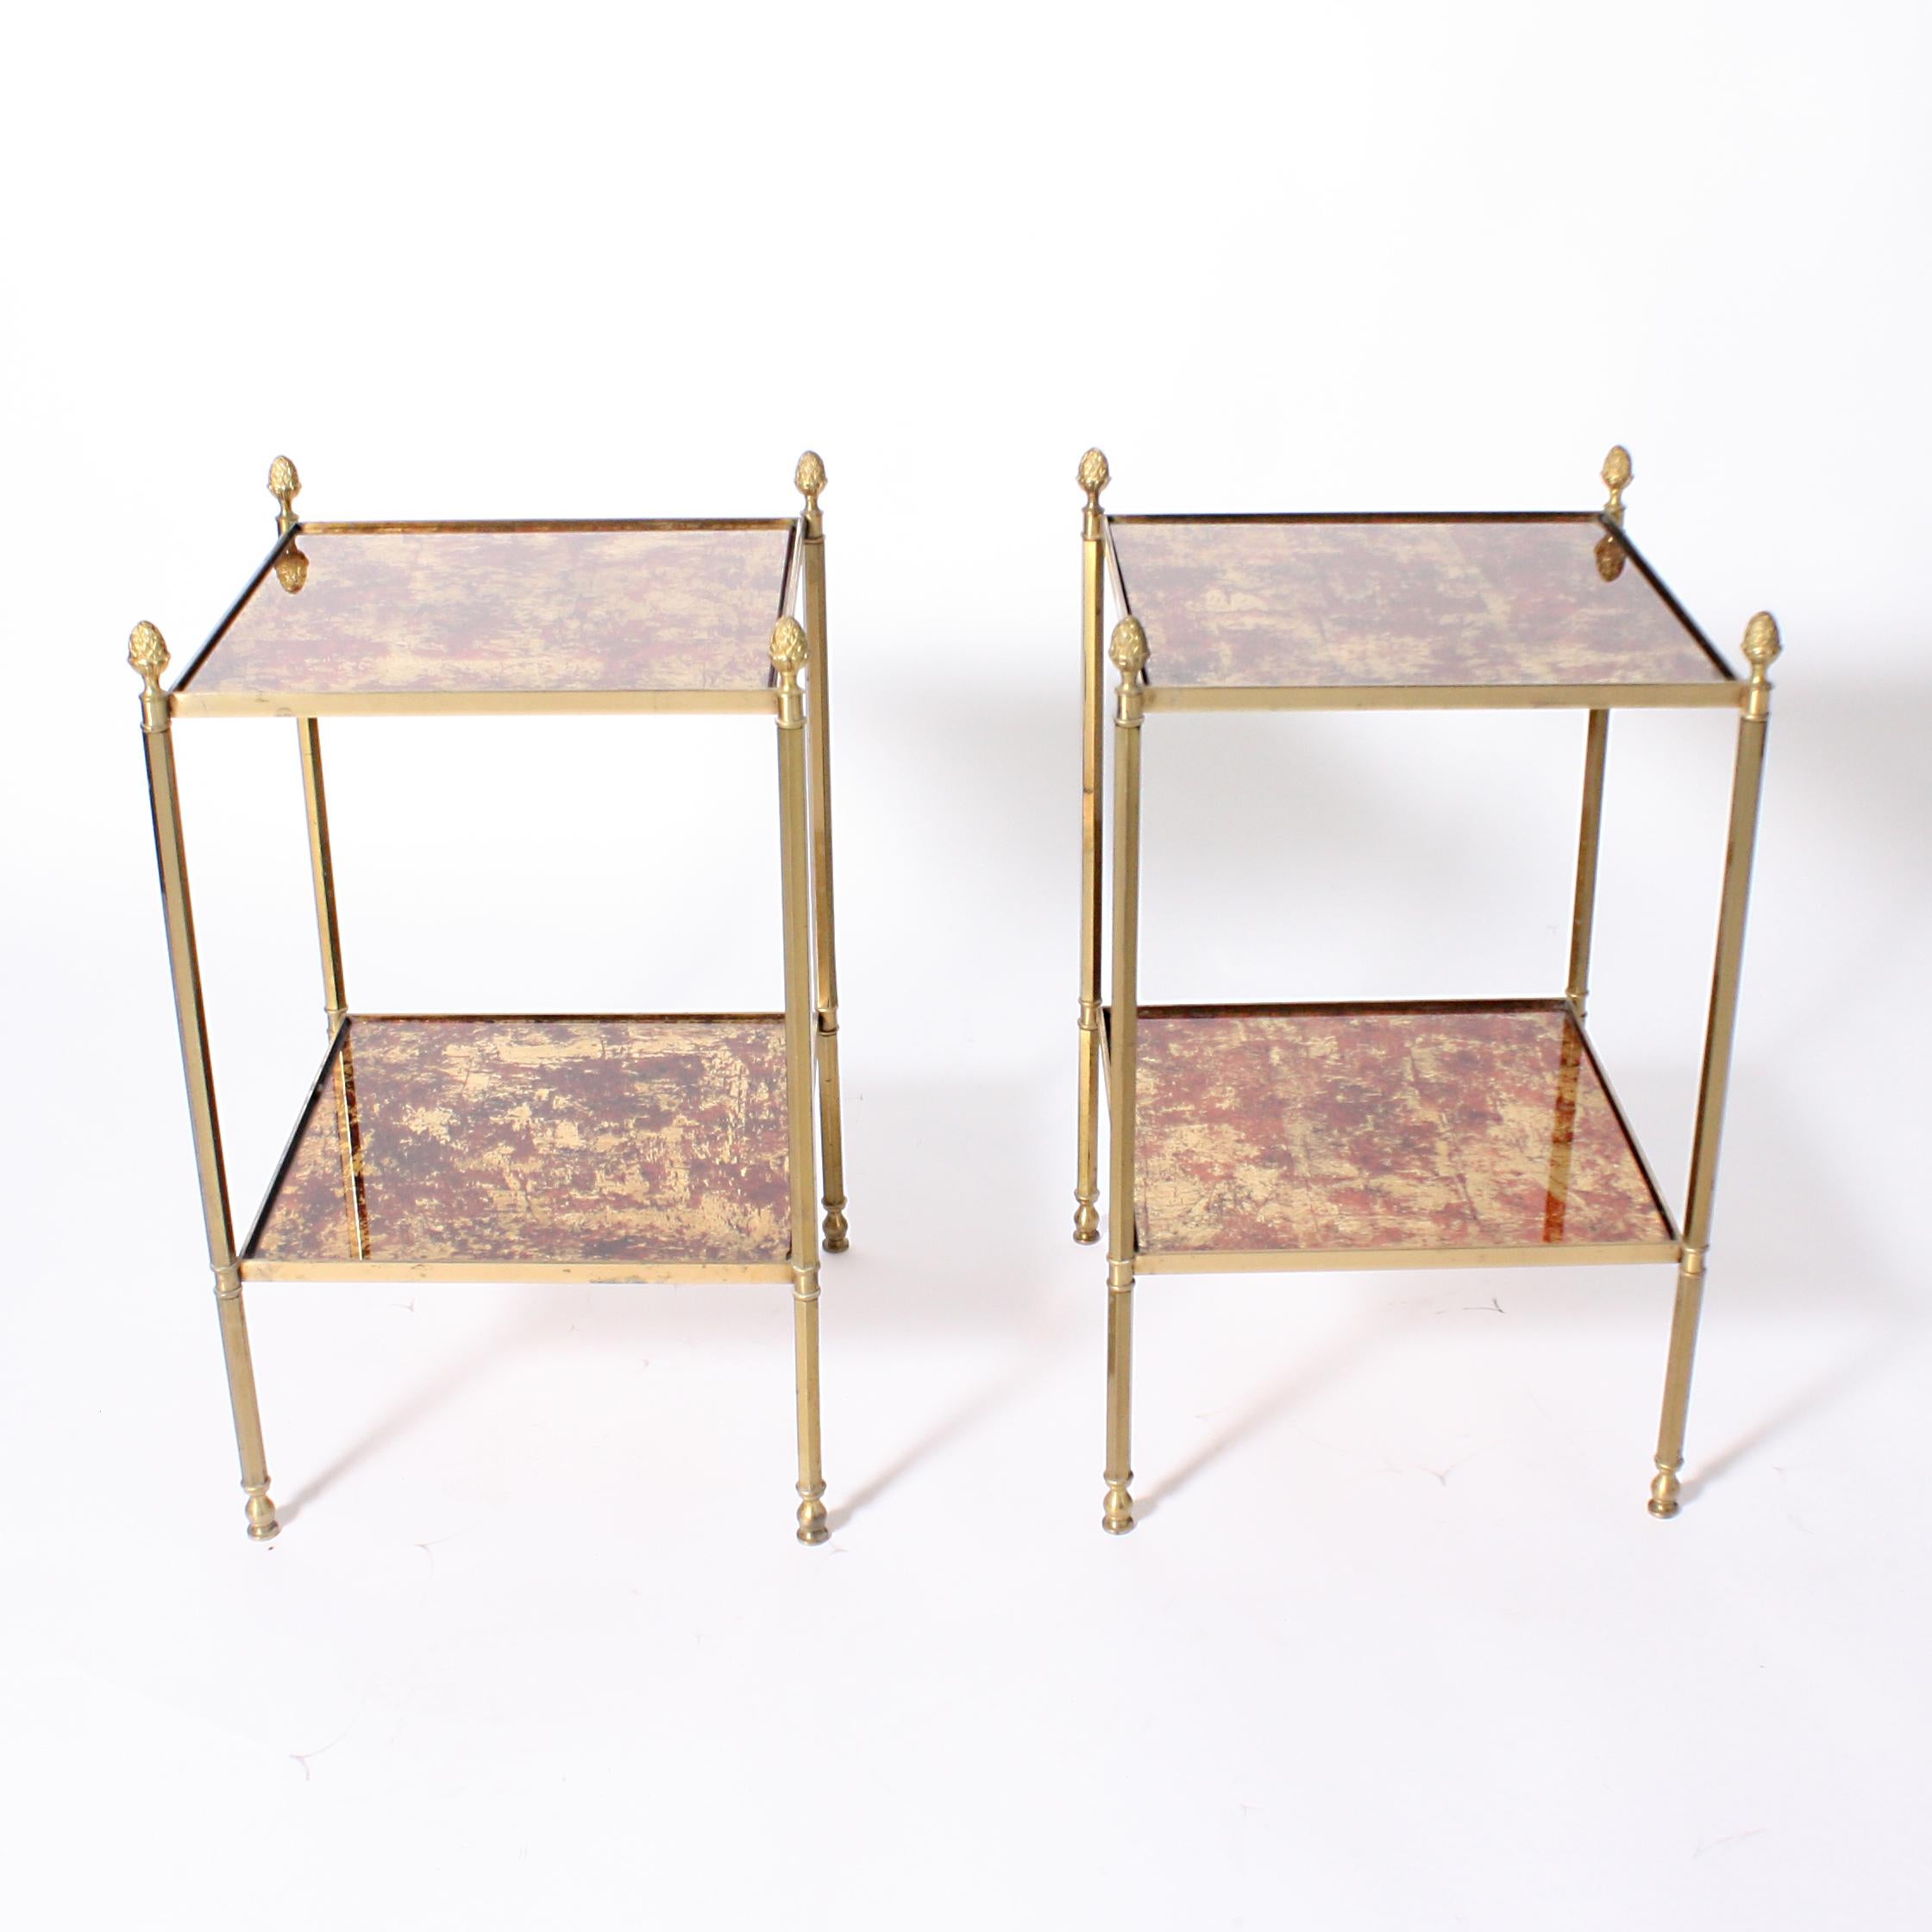 Mid-20th Century Pair of Brass Side Tables with Reverse Painted Glass Shelves, circa 1950